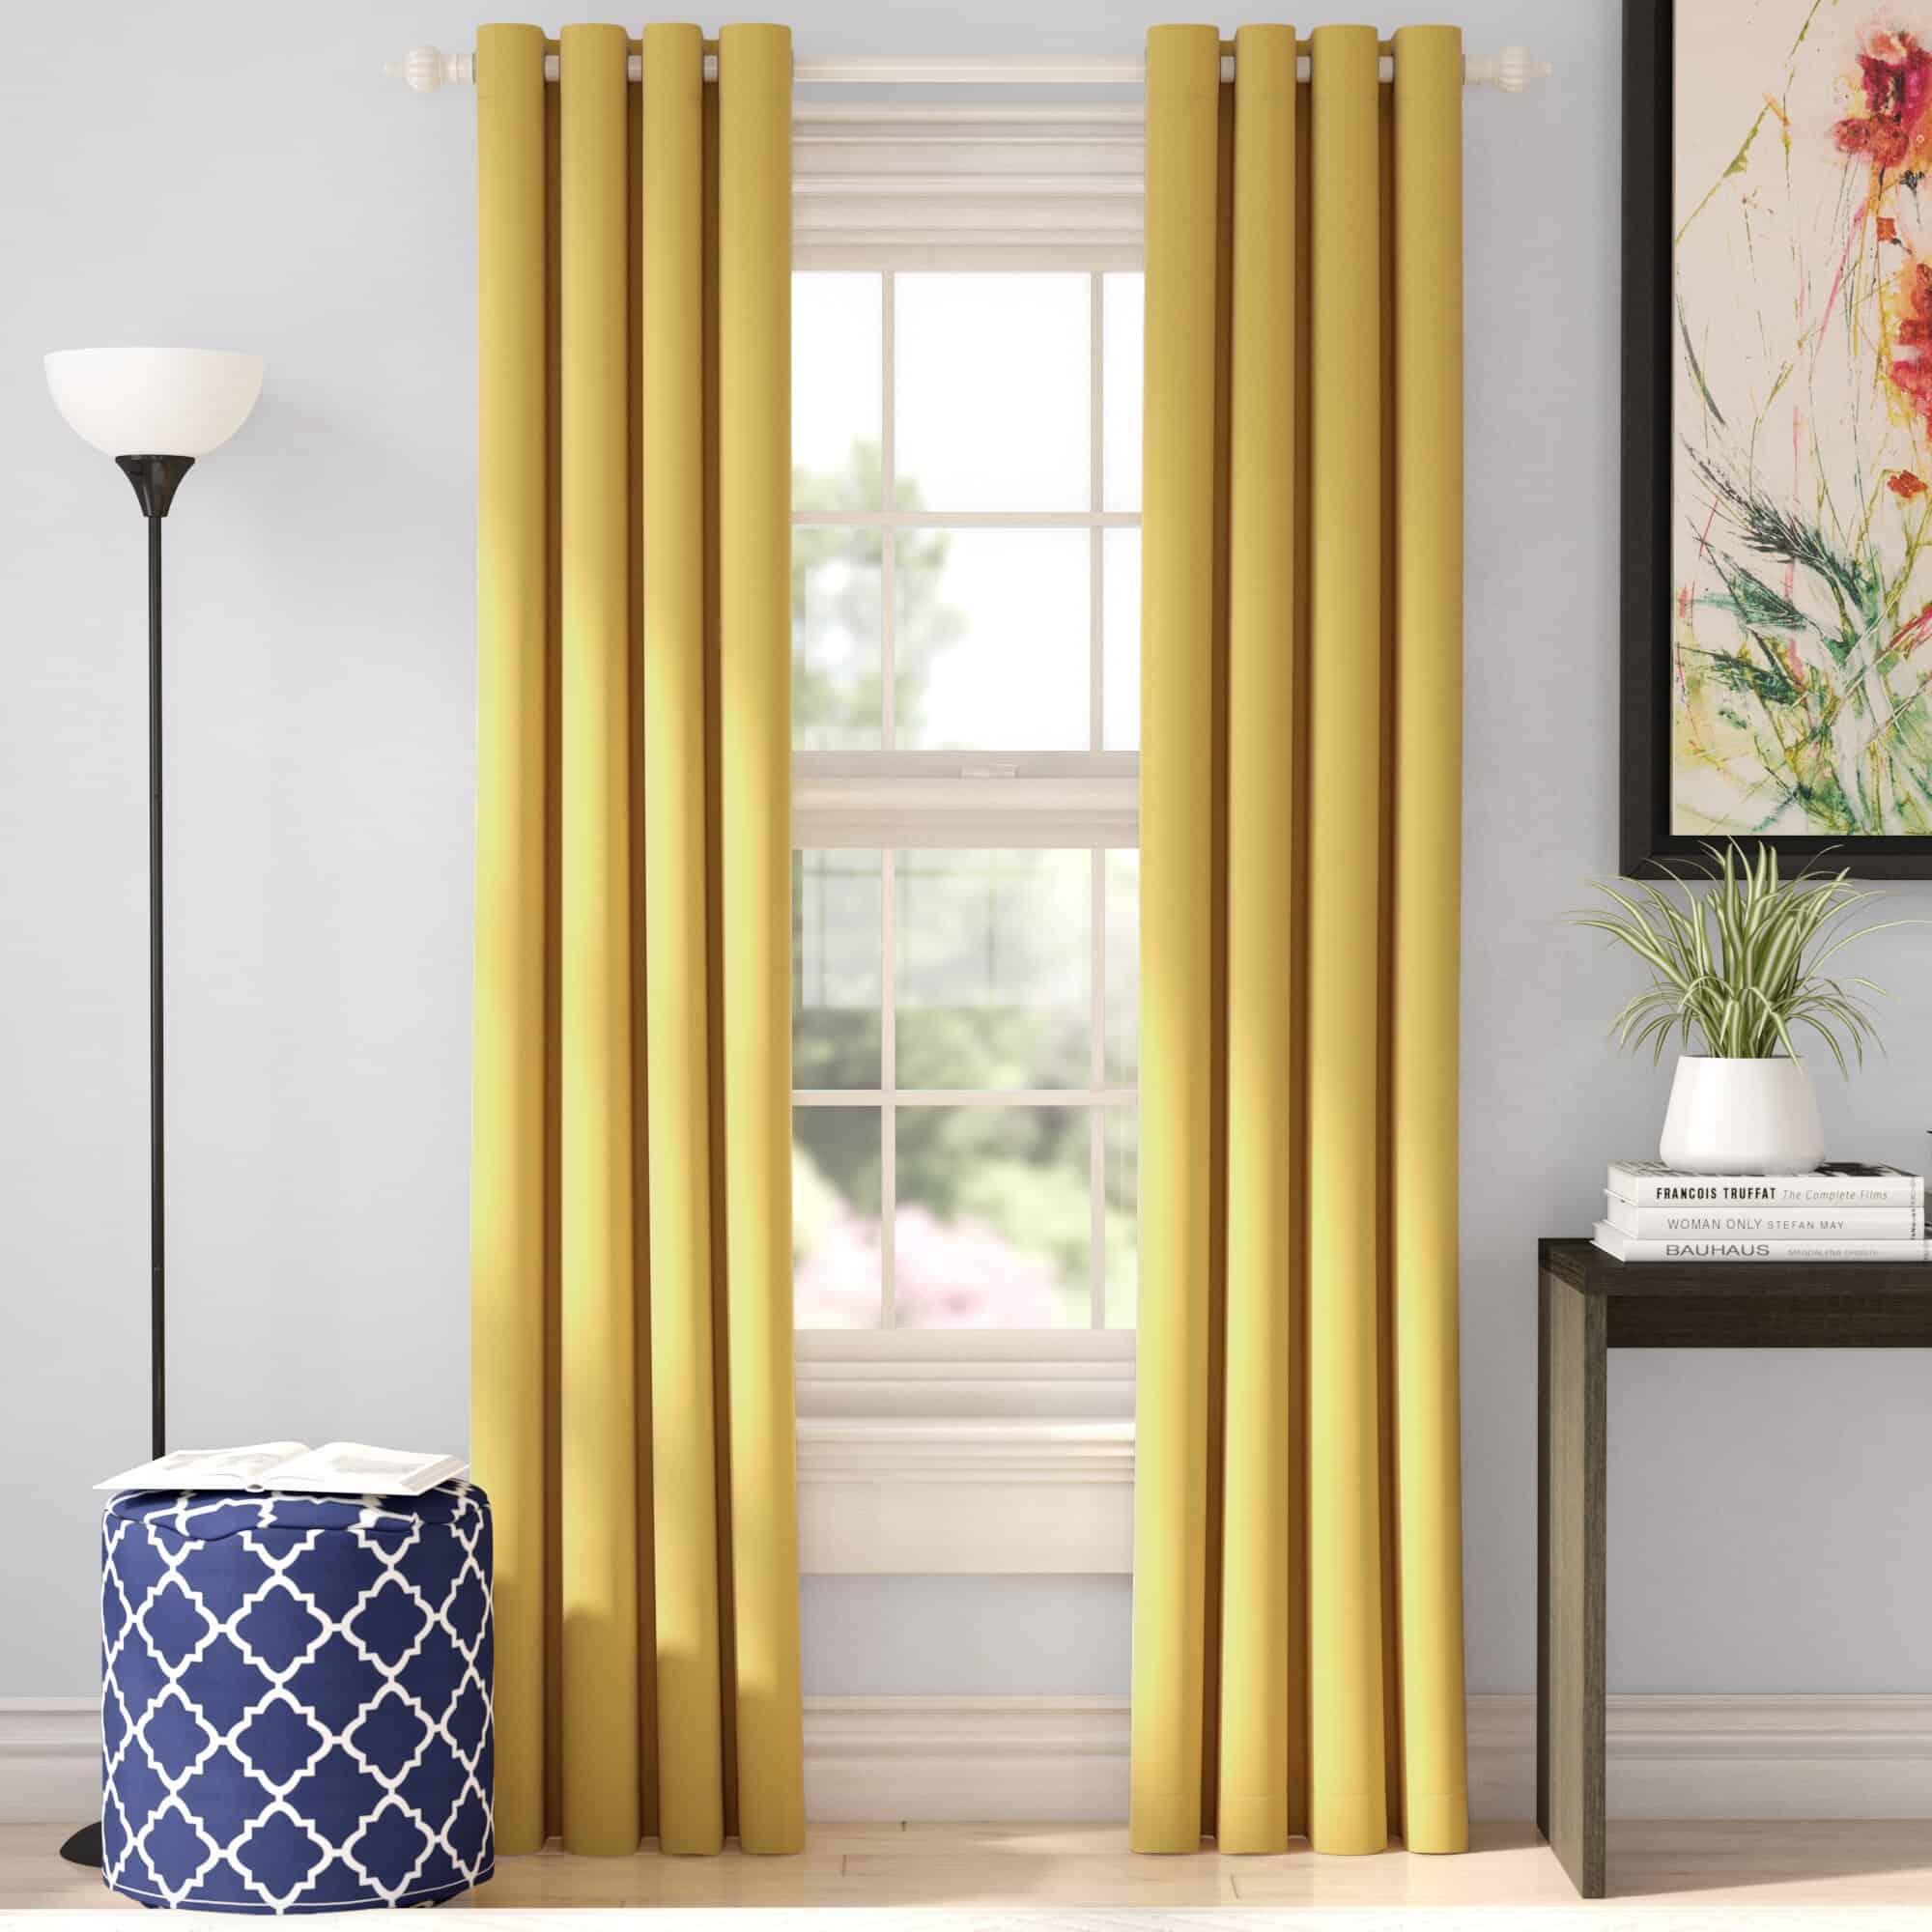 Sunny Yellow Curtains With White Walls